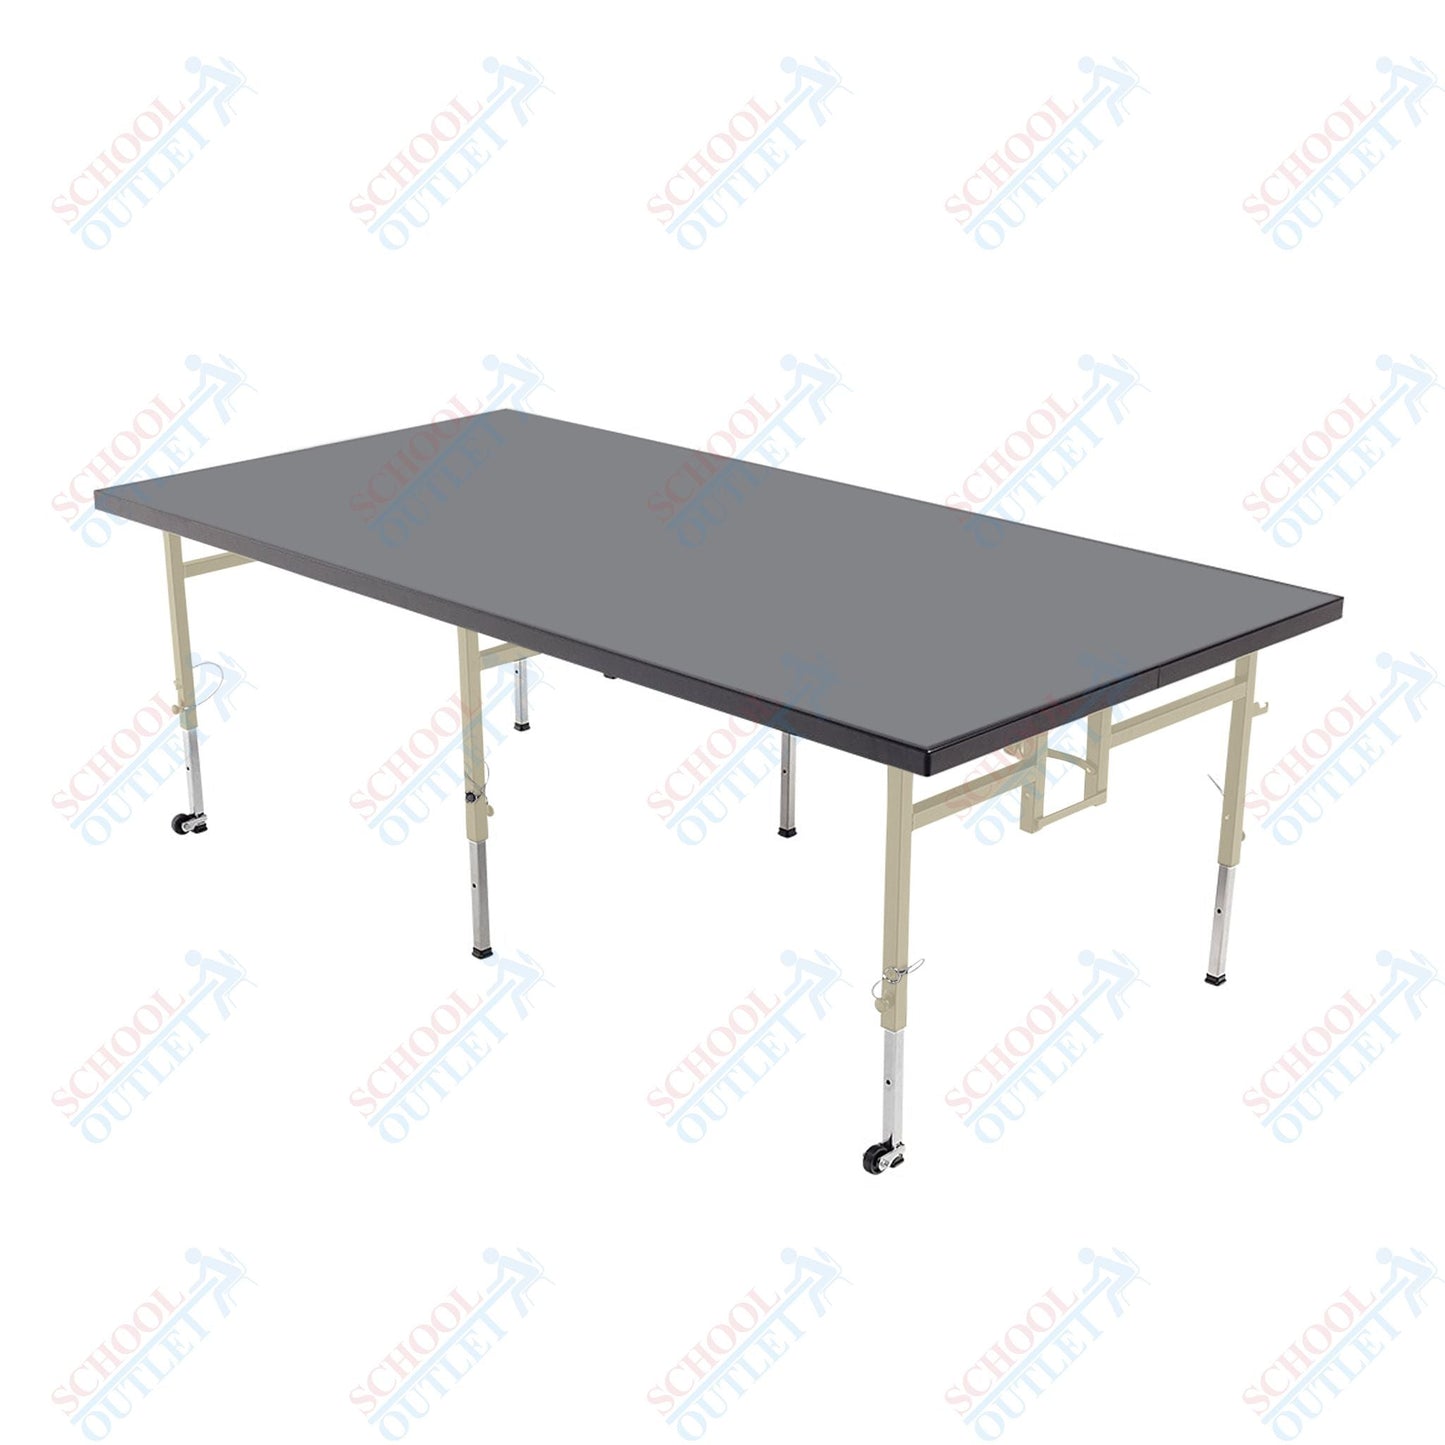 AmTab Adjustable Height Stage - Carpet Top - 36"W x 96"L x Adjustable 24" to 32"H (AmTab AMT-STA3824C) - SchoolOutlet